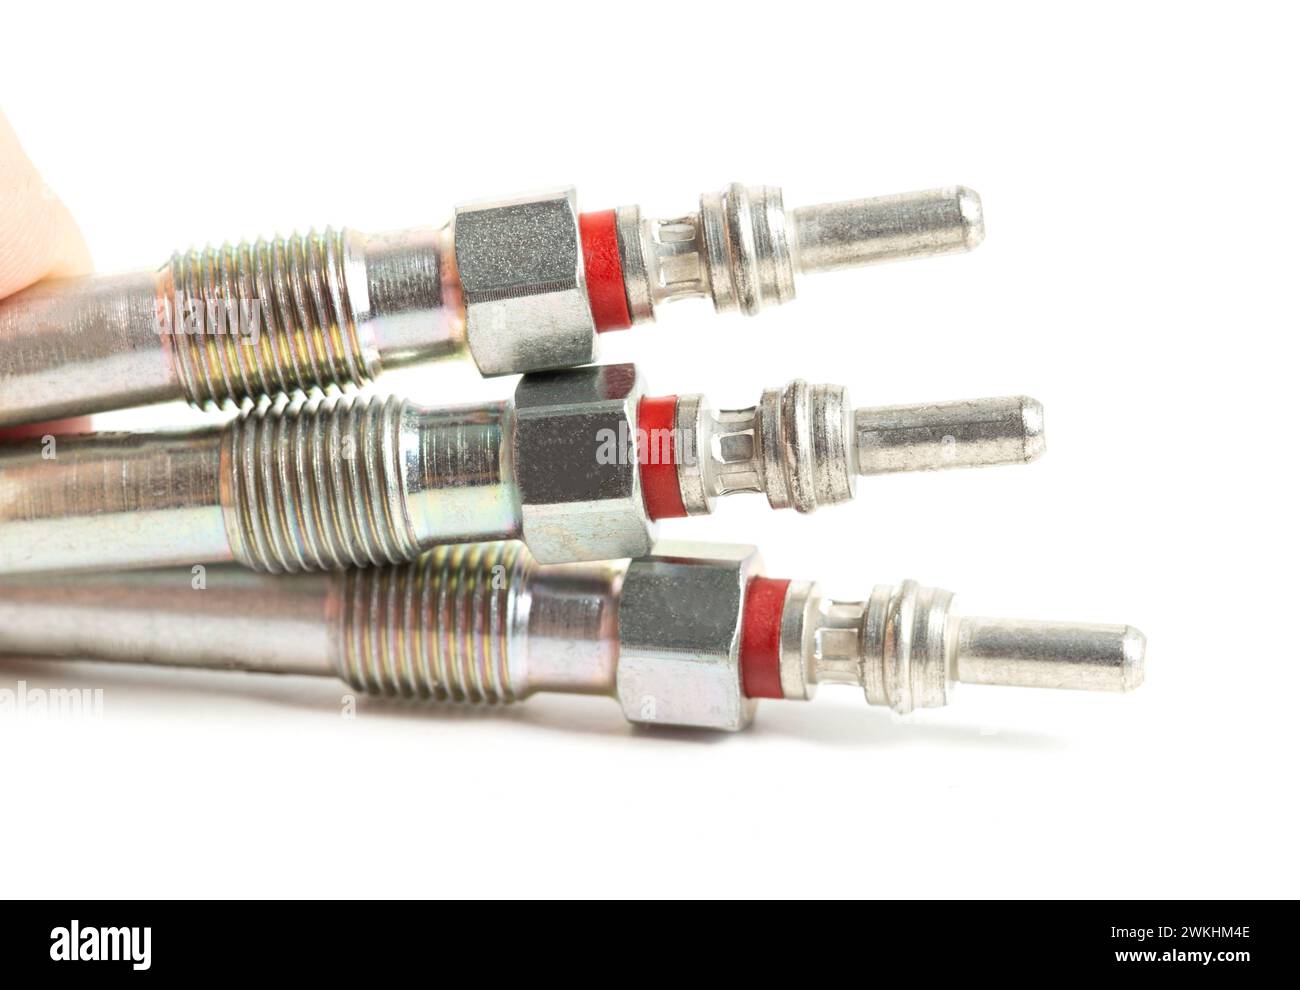 Modern ceramic glow plugs for warming up a diesel engine before starting. White background, isolate. Macro, engine start Stock Photo